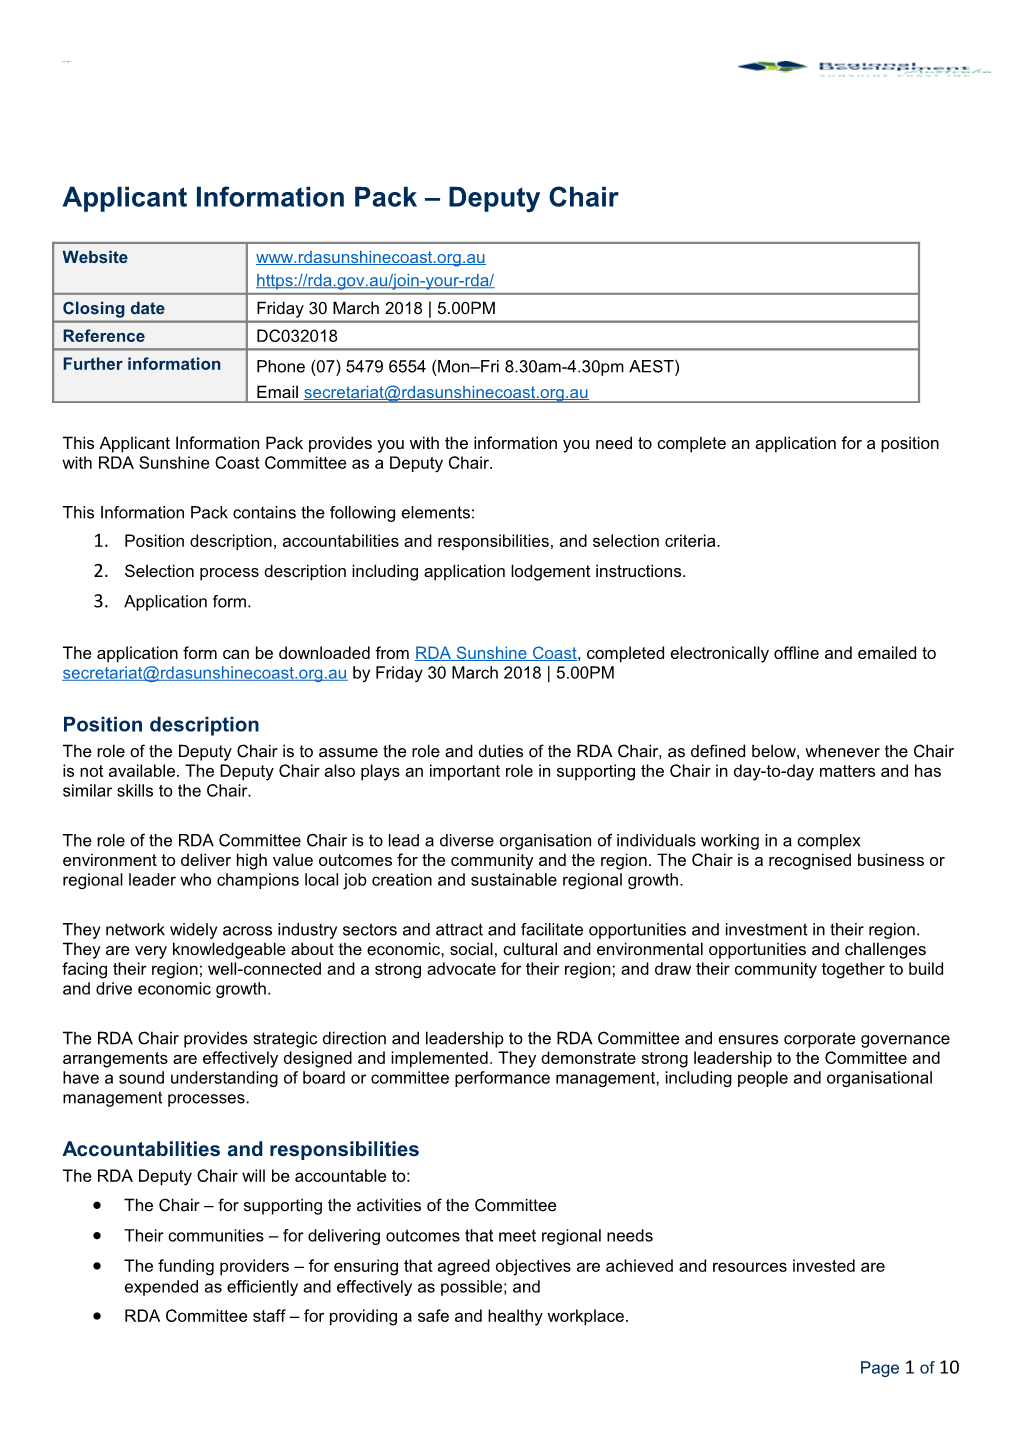 Applicant Information Pack Deputy Chair